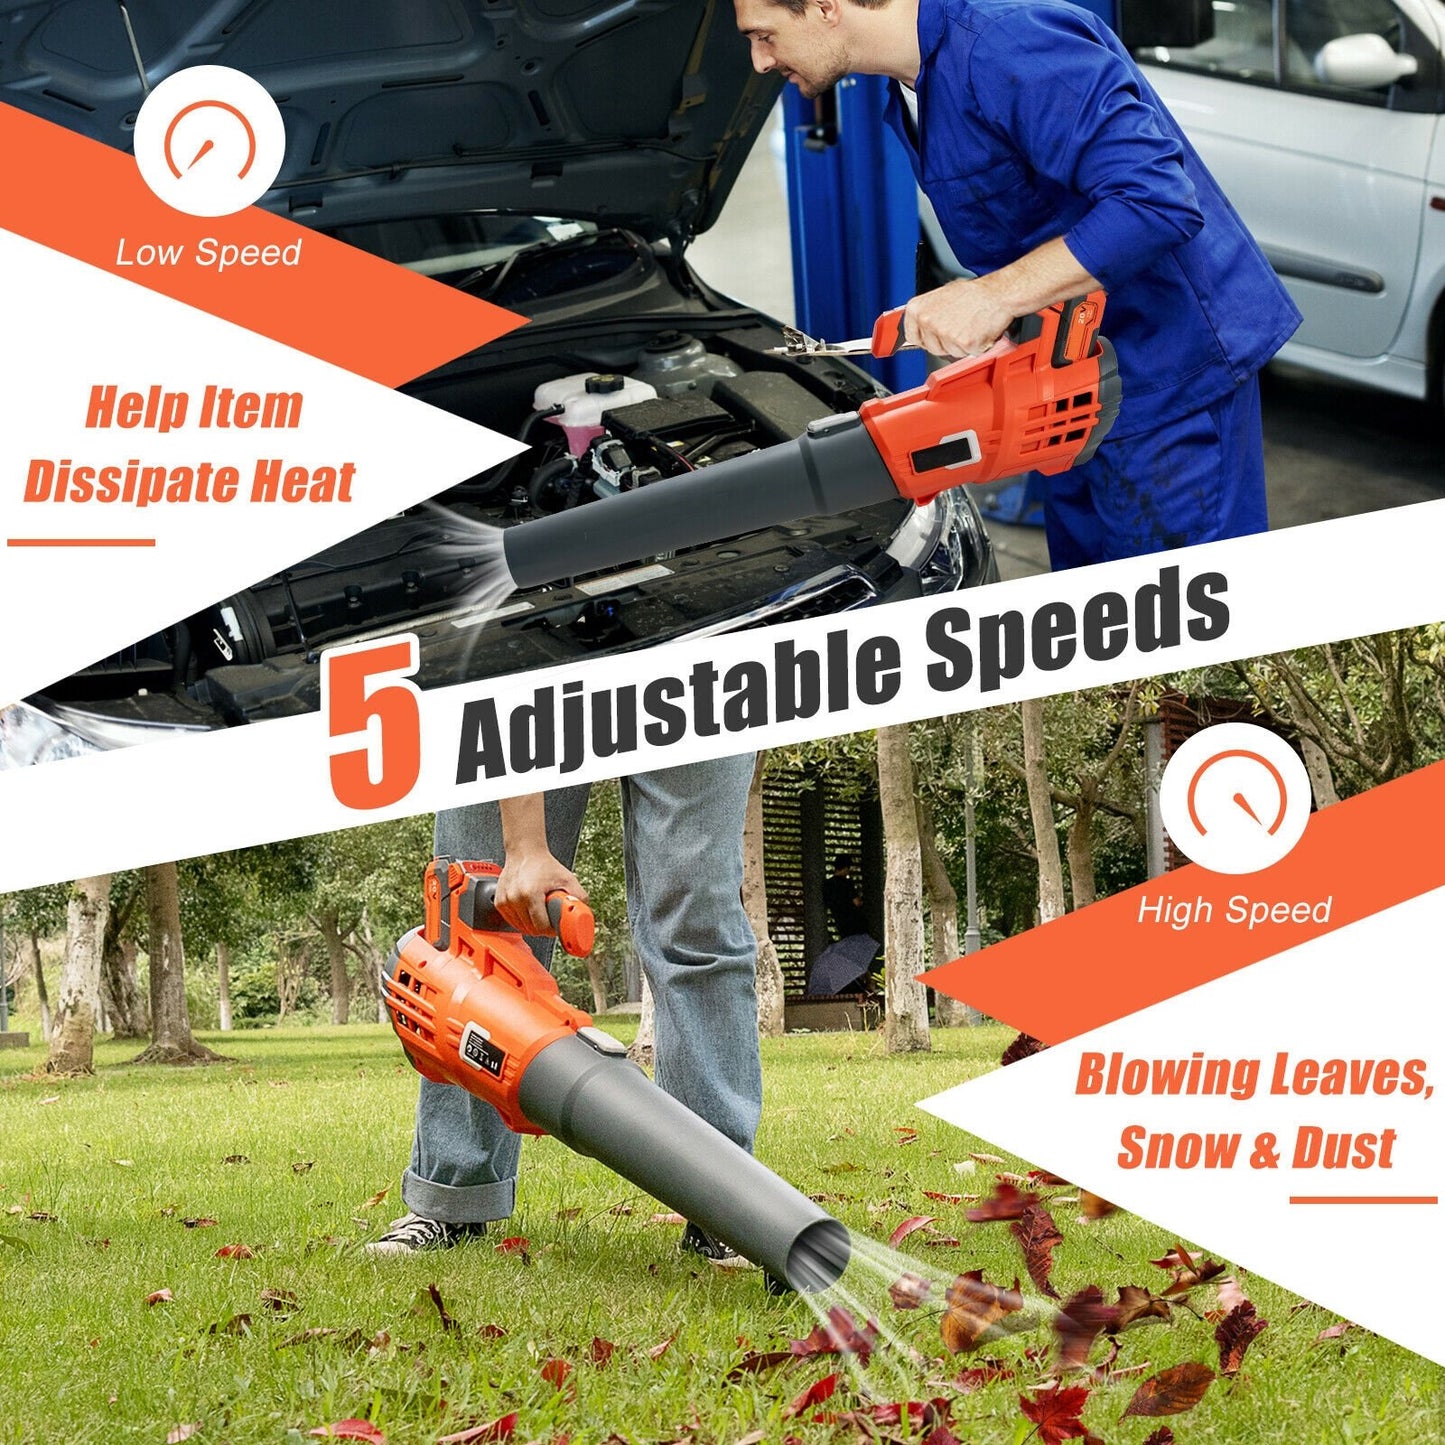 Electrical Cordless Leaf Blower with Battery and Charger, Orange - Gallery Canada